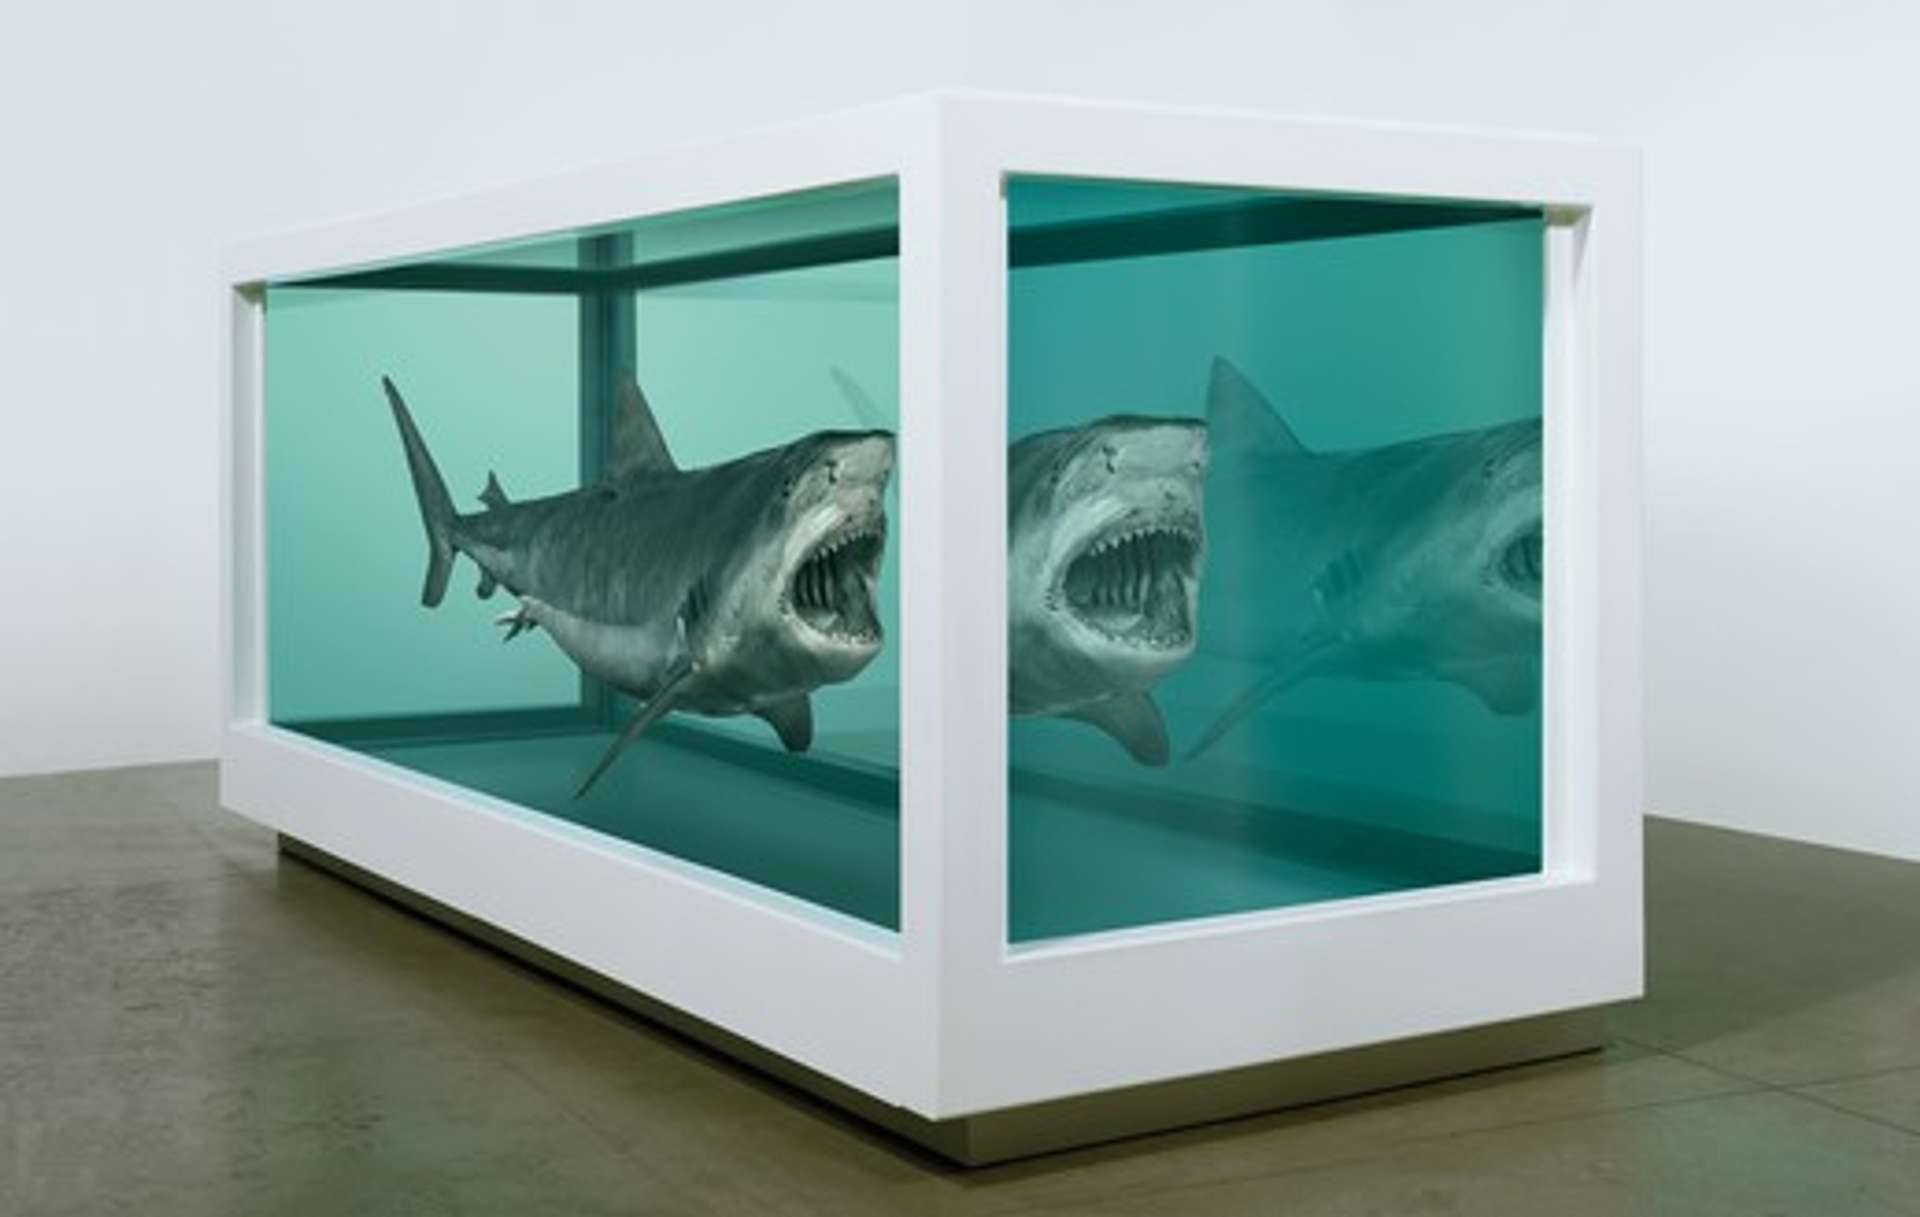 Sculpture of a shark submerged in blue preservatives